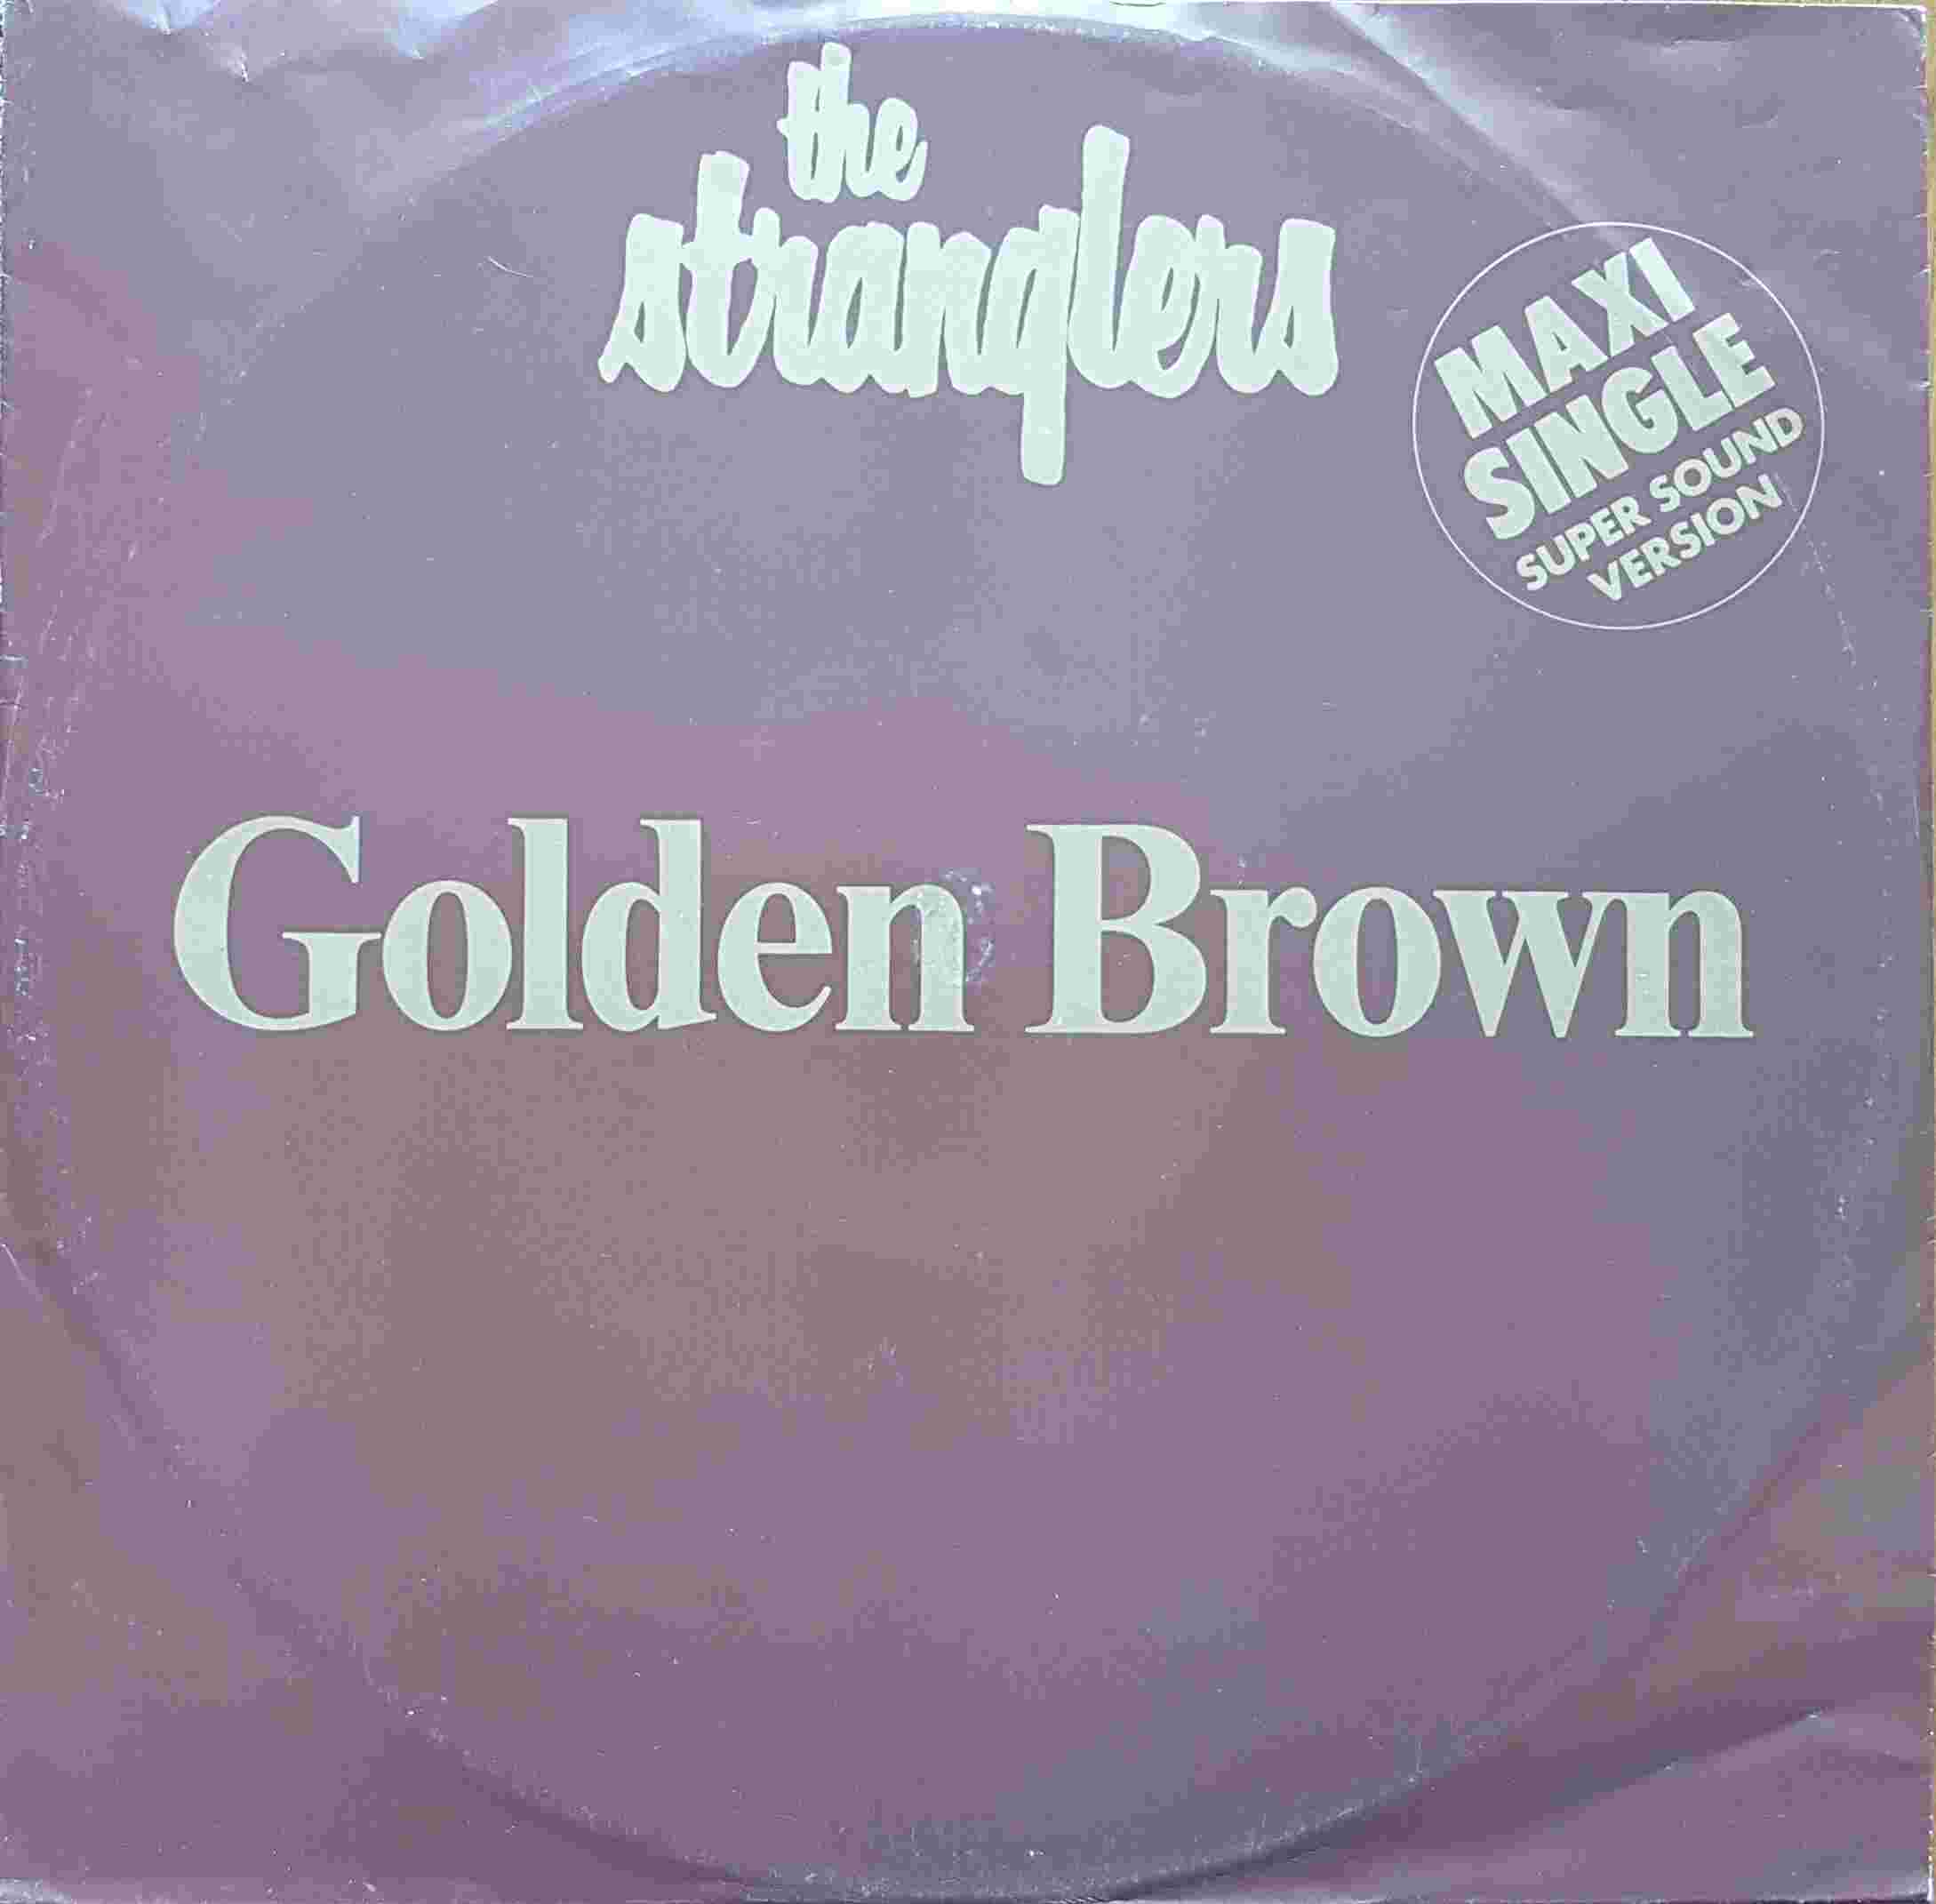 Picture of 052 - 83255 Golden brown - German import by artist The Stranglers from The Stranglers 12inches